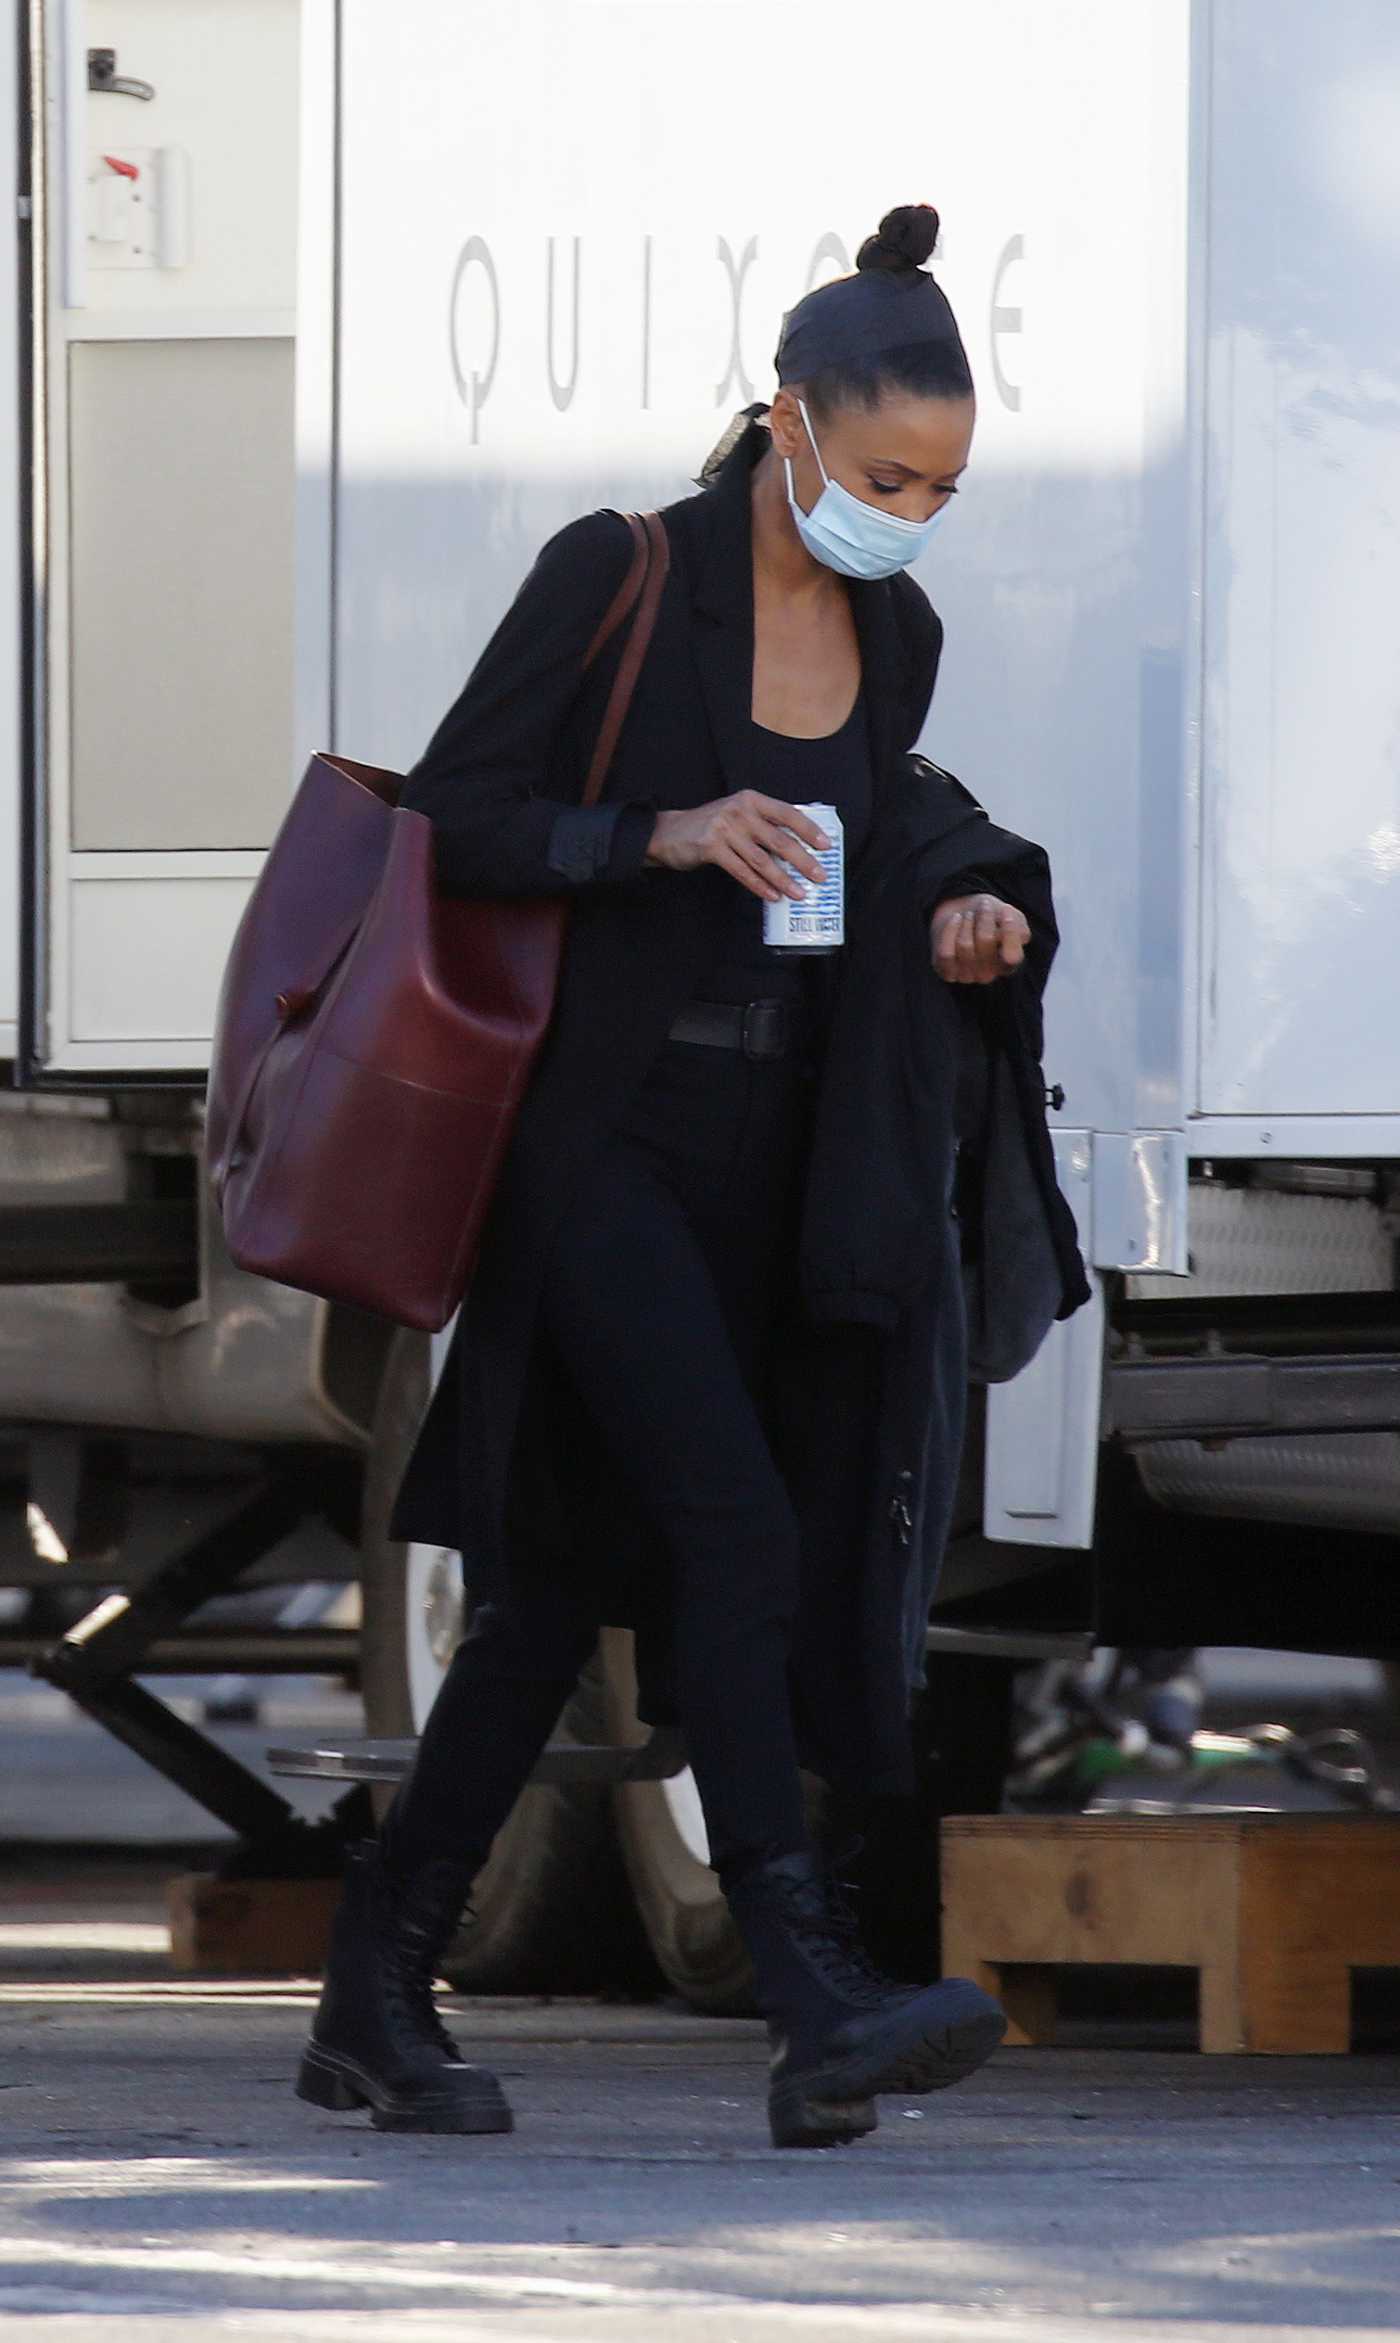 Thandie Newton in a Black Outfit Heads to Set Season 4 of Her Hit Show Westworld in Los Angeles 11/23/2021